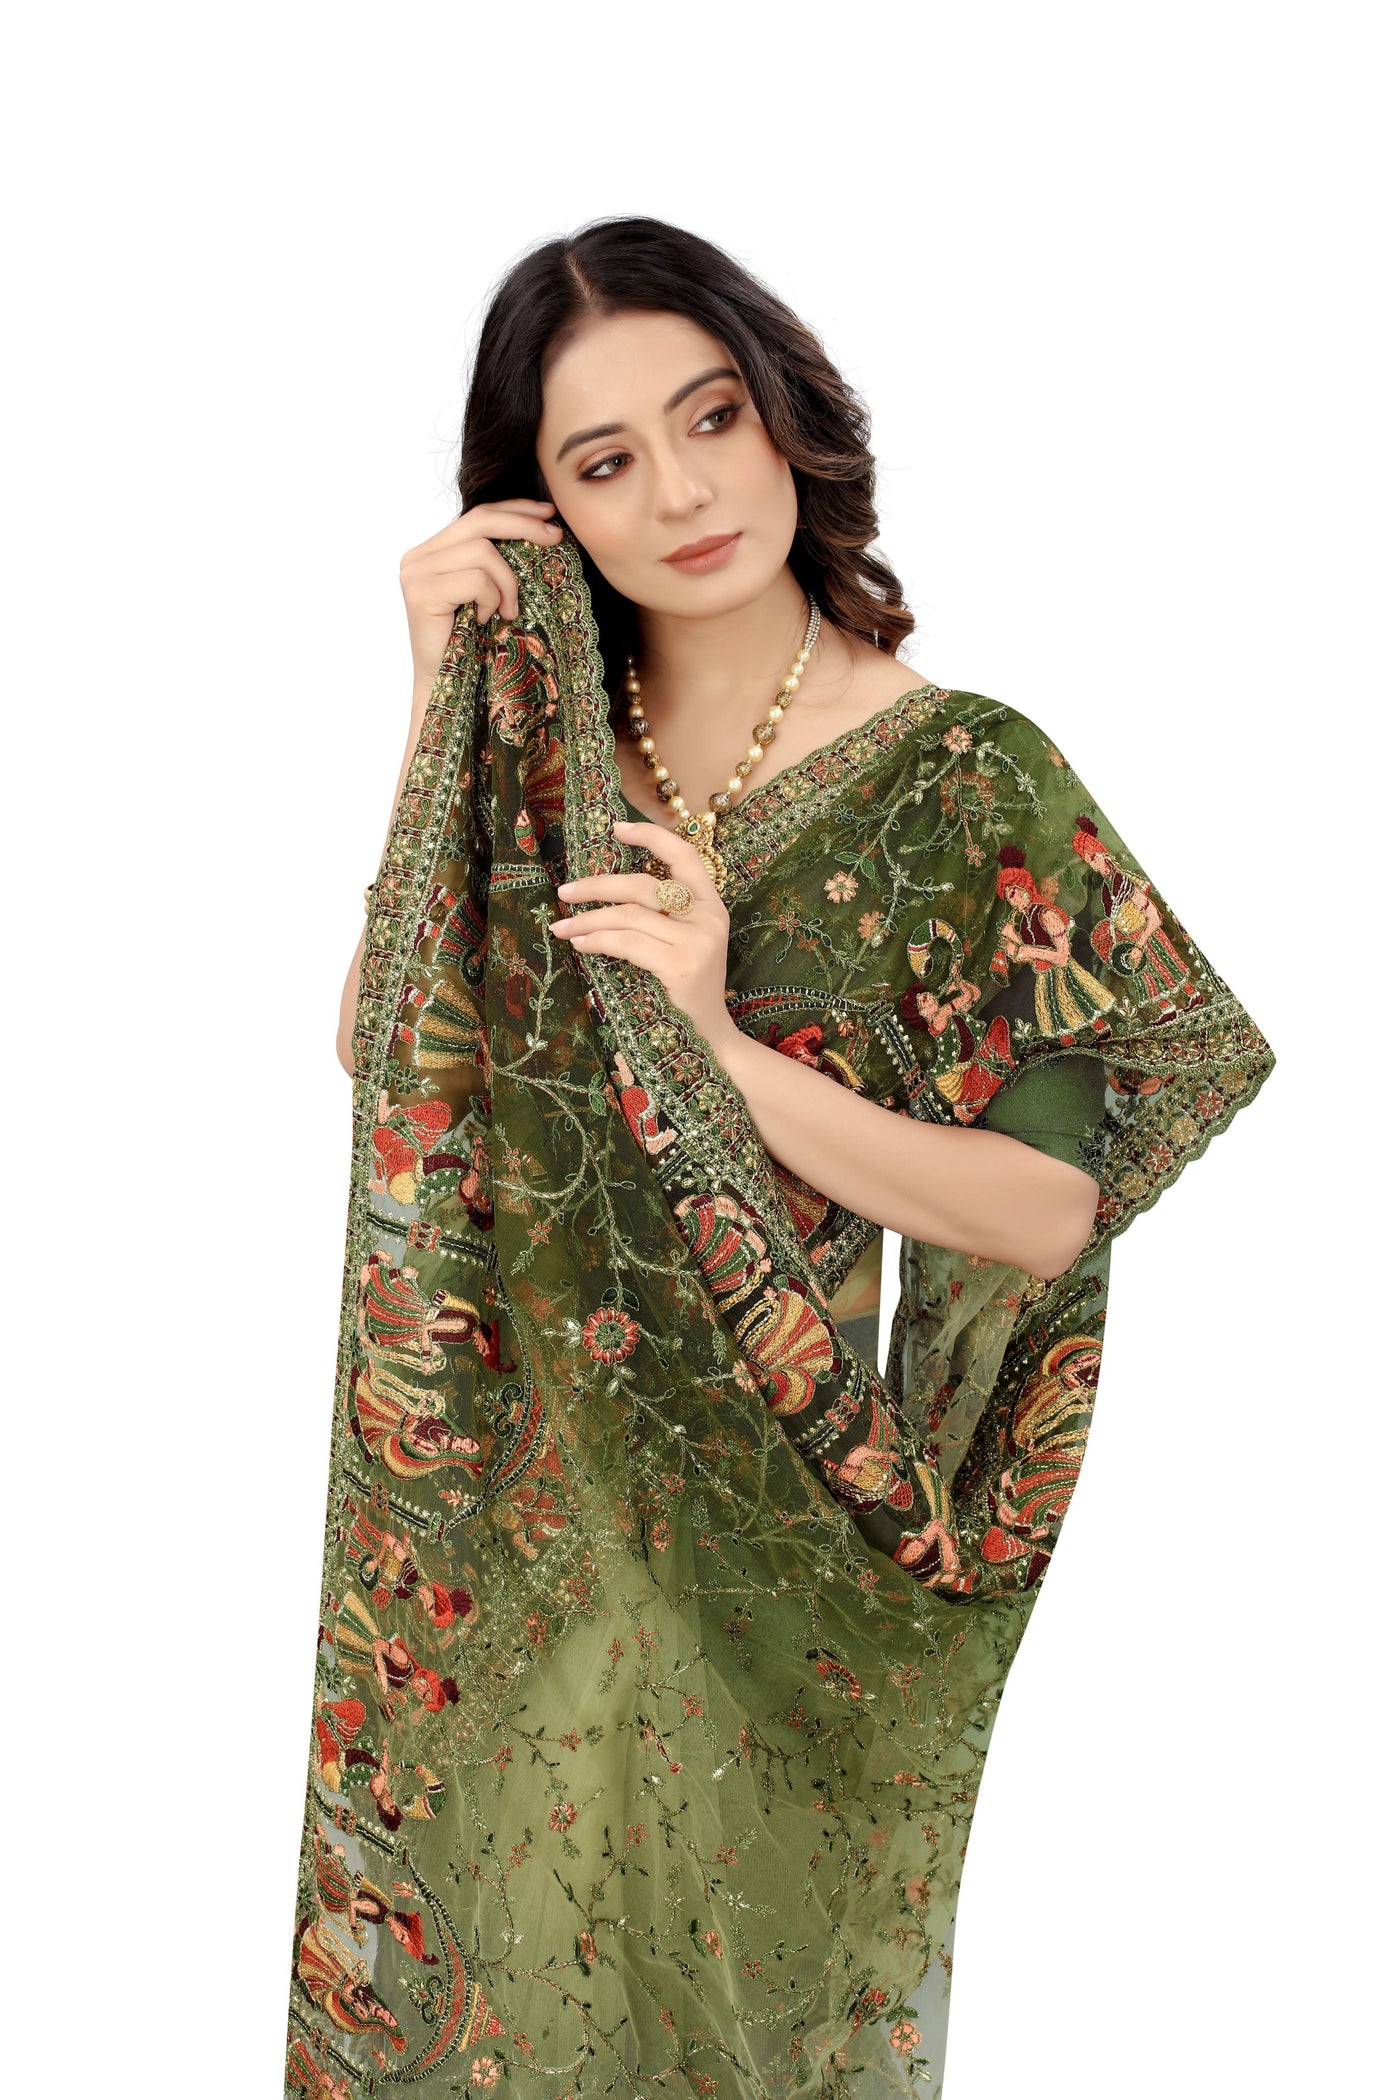 Olive Green Net Embroidered Saree With Blouse